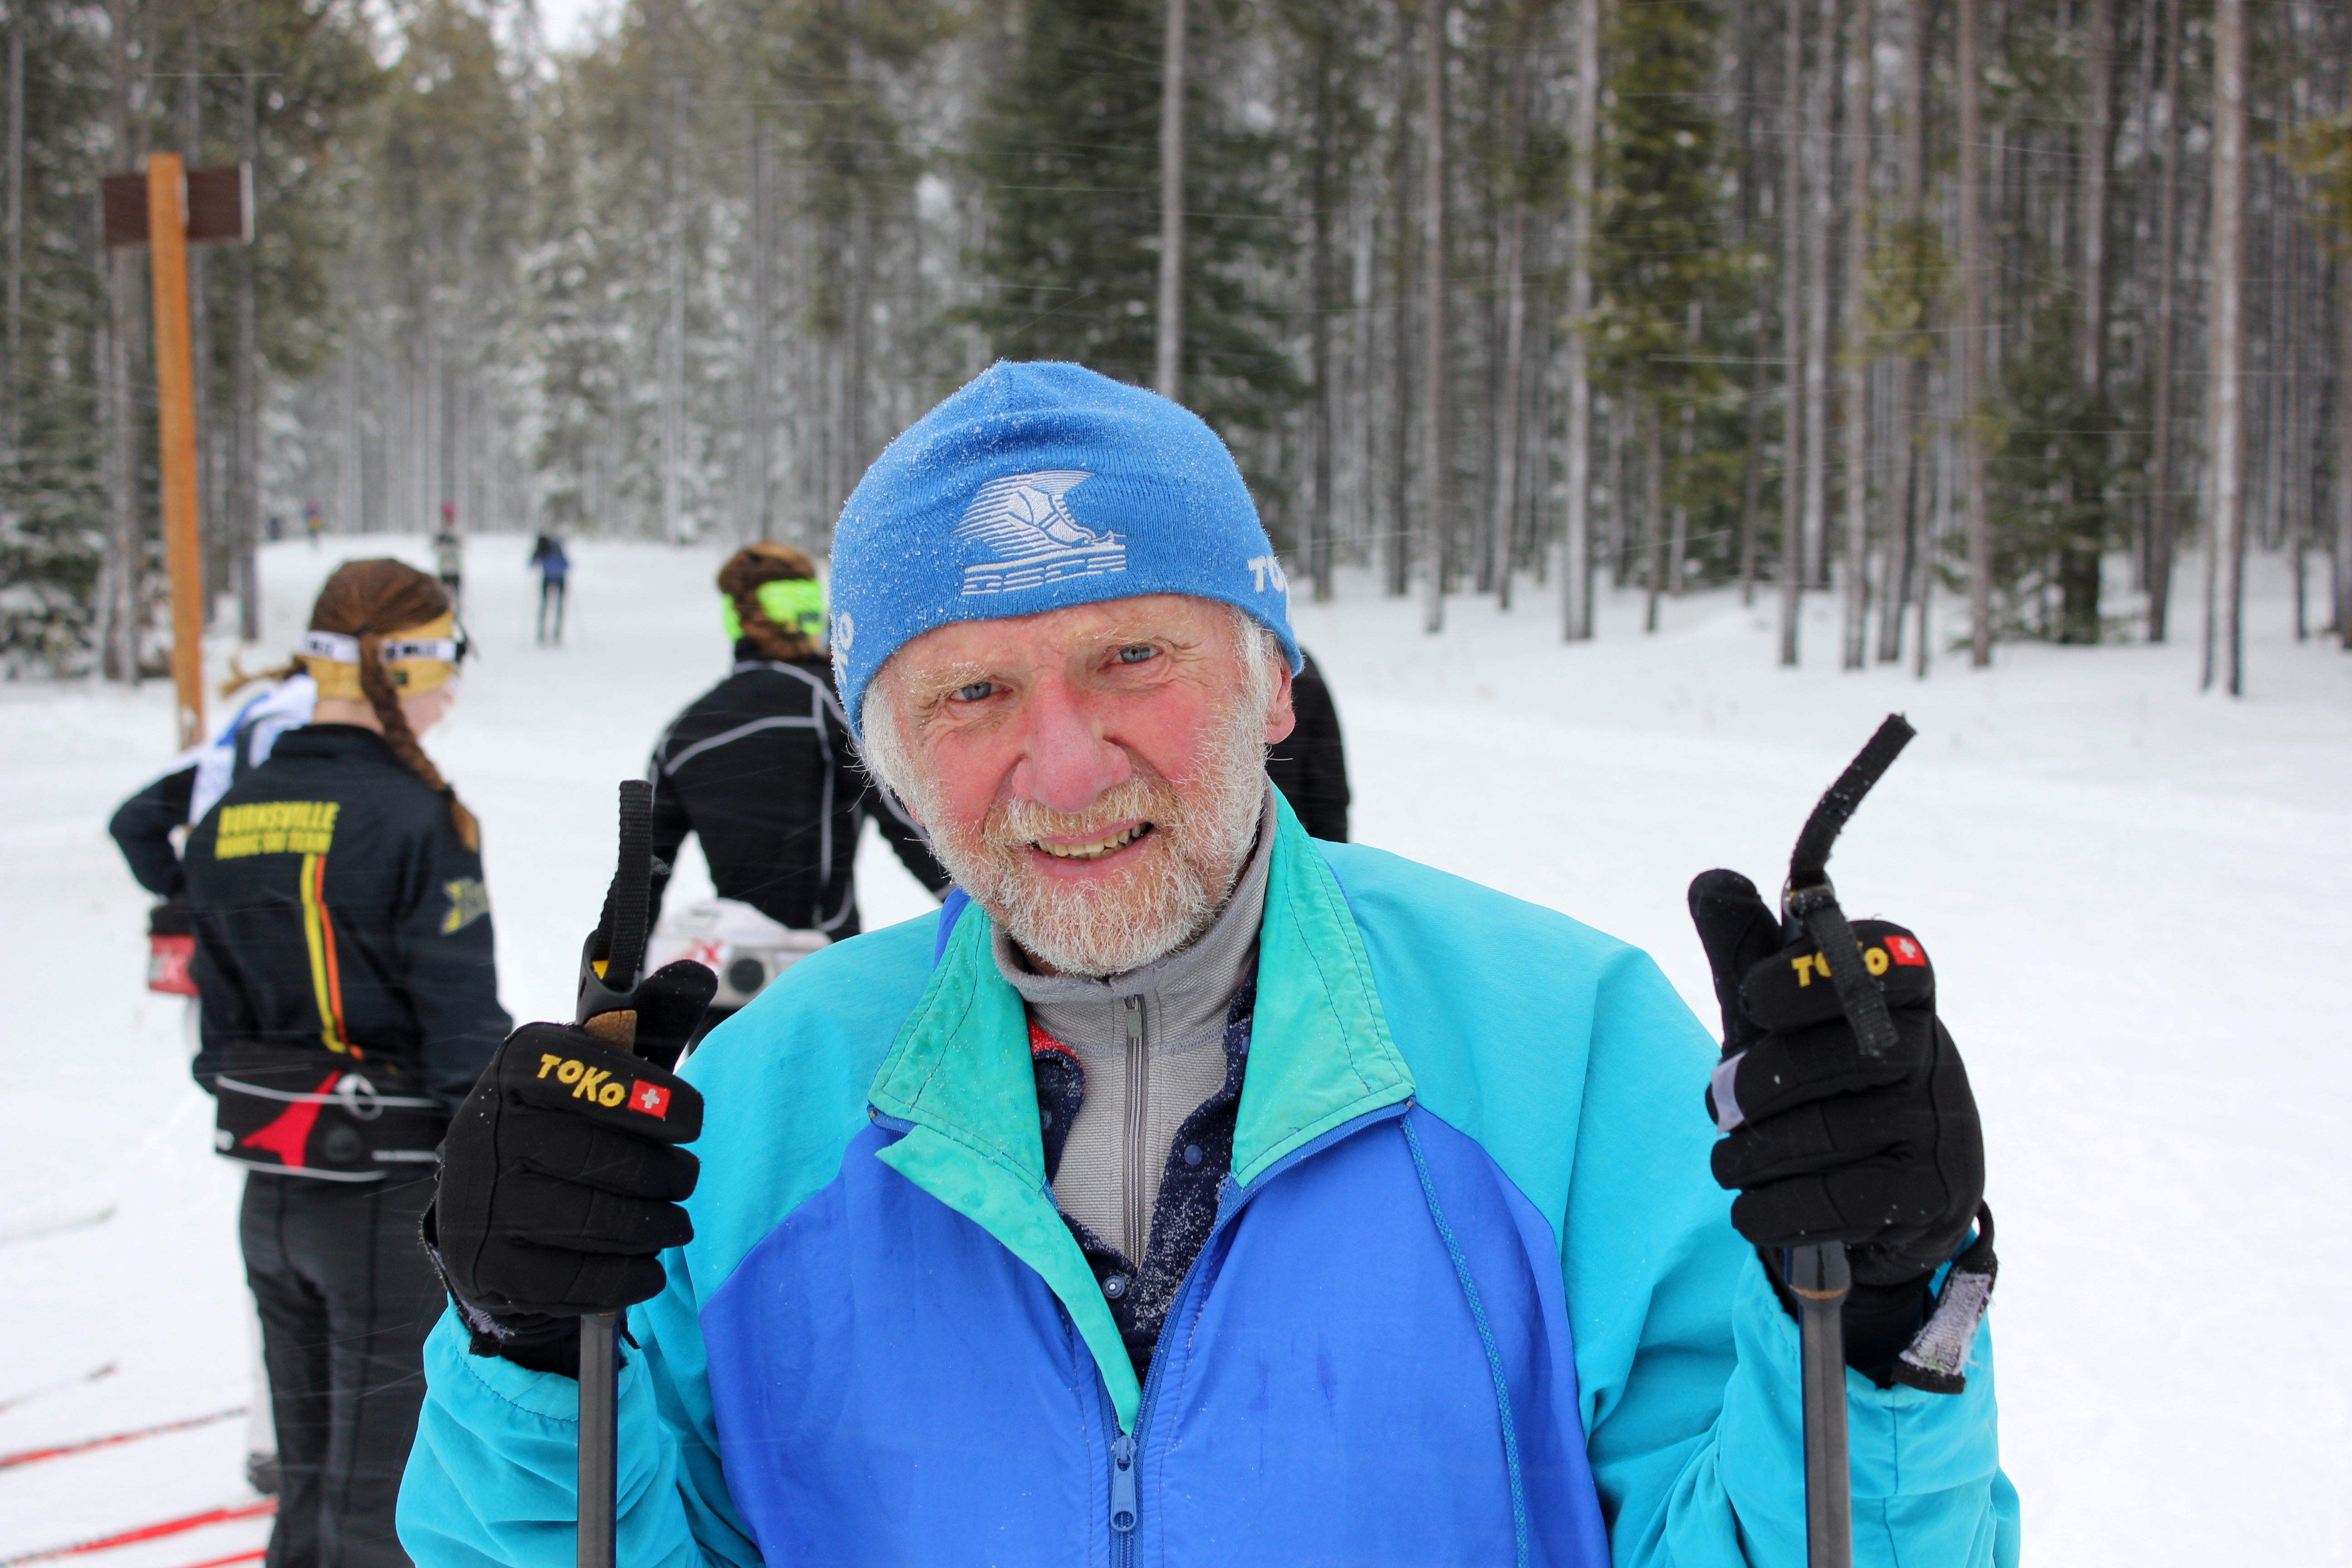 Steve German of Missoula, Mont. has been coming to West Yellowstone for 30 years. 